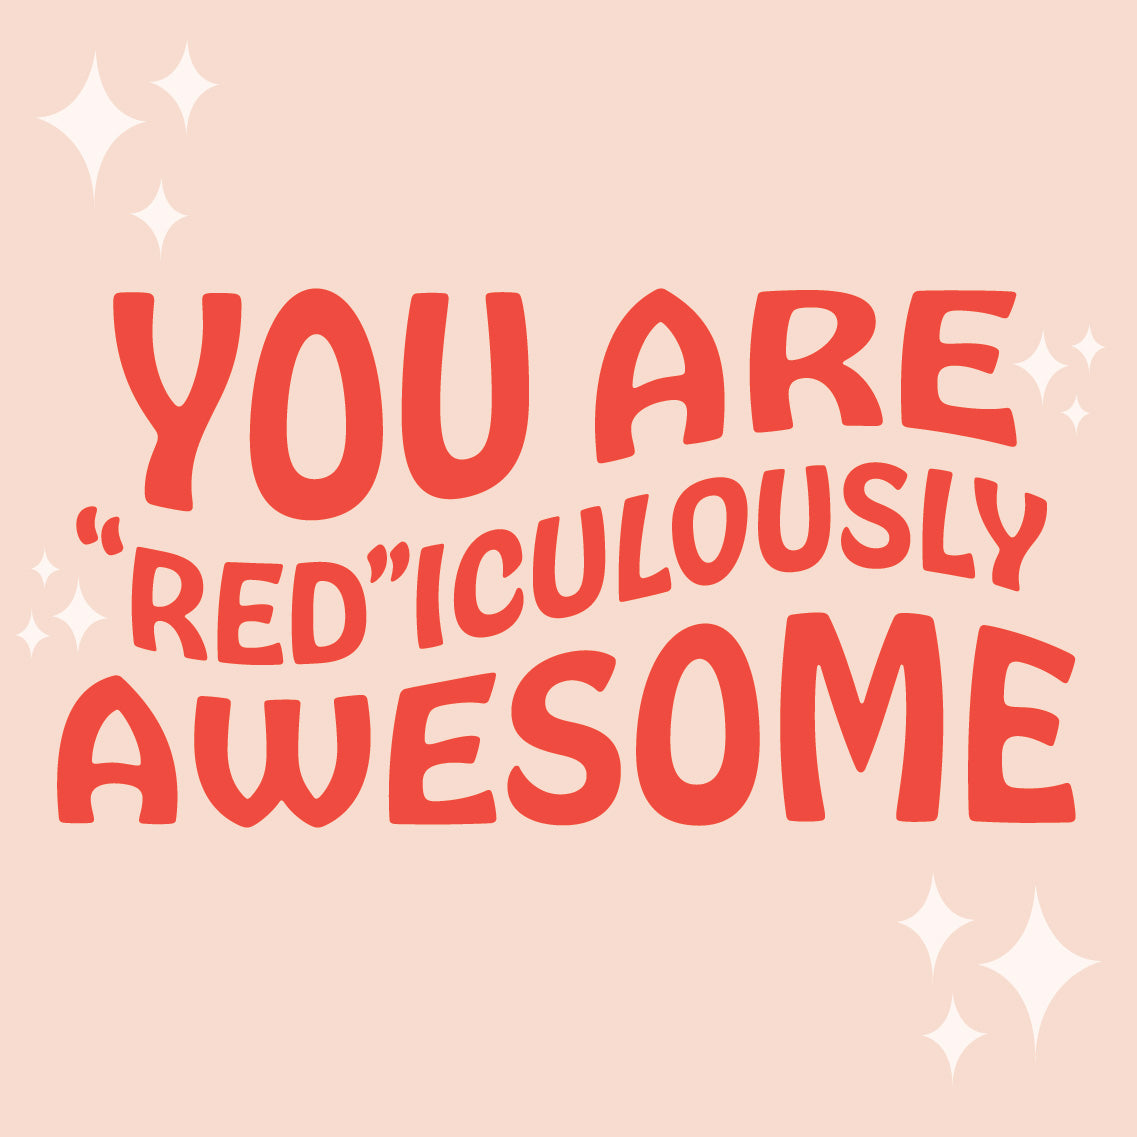 You Are "Red"iculously Awesome